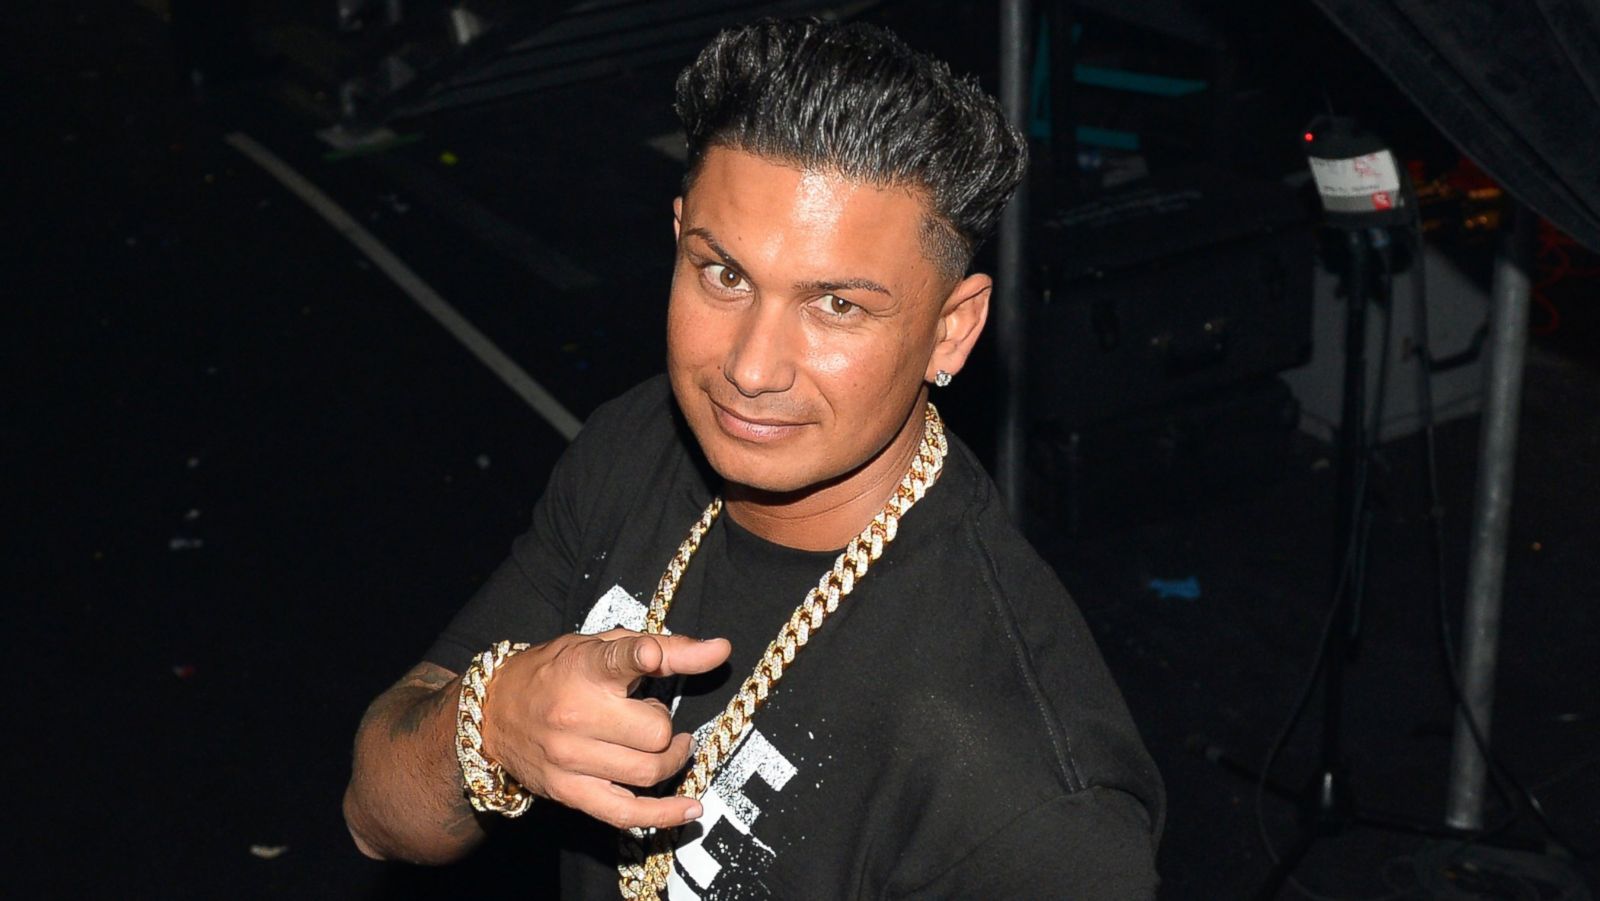 DJ Pauly D wearing a black shirt and gold chain